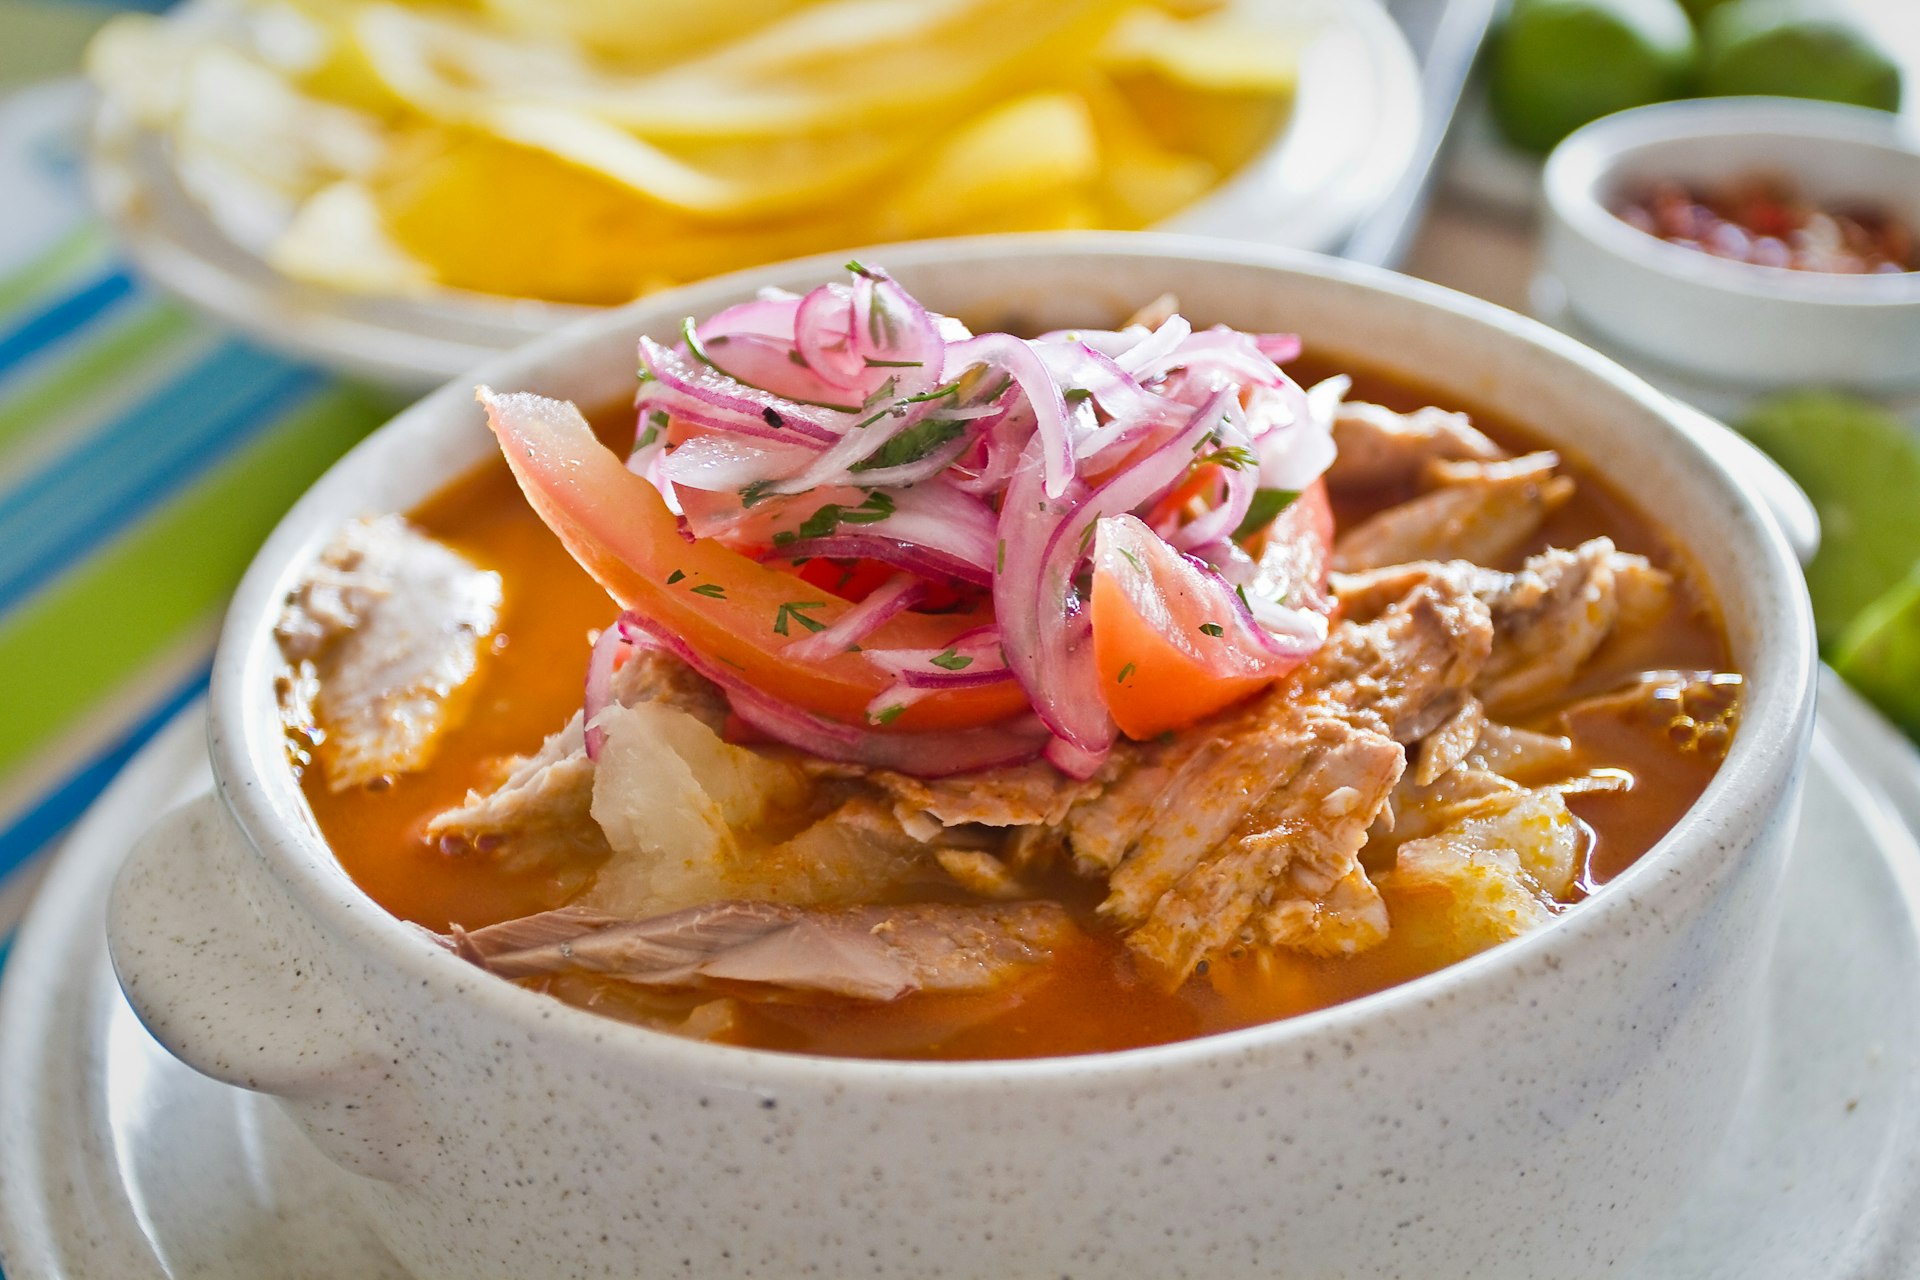 Encebollado: a fish stew in a bowl served with banana chips and lemon